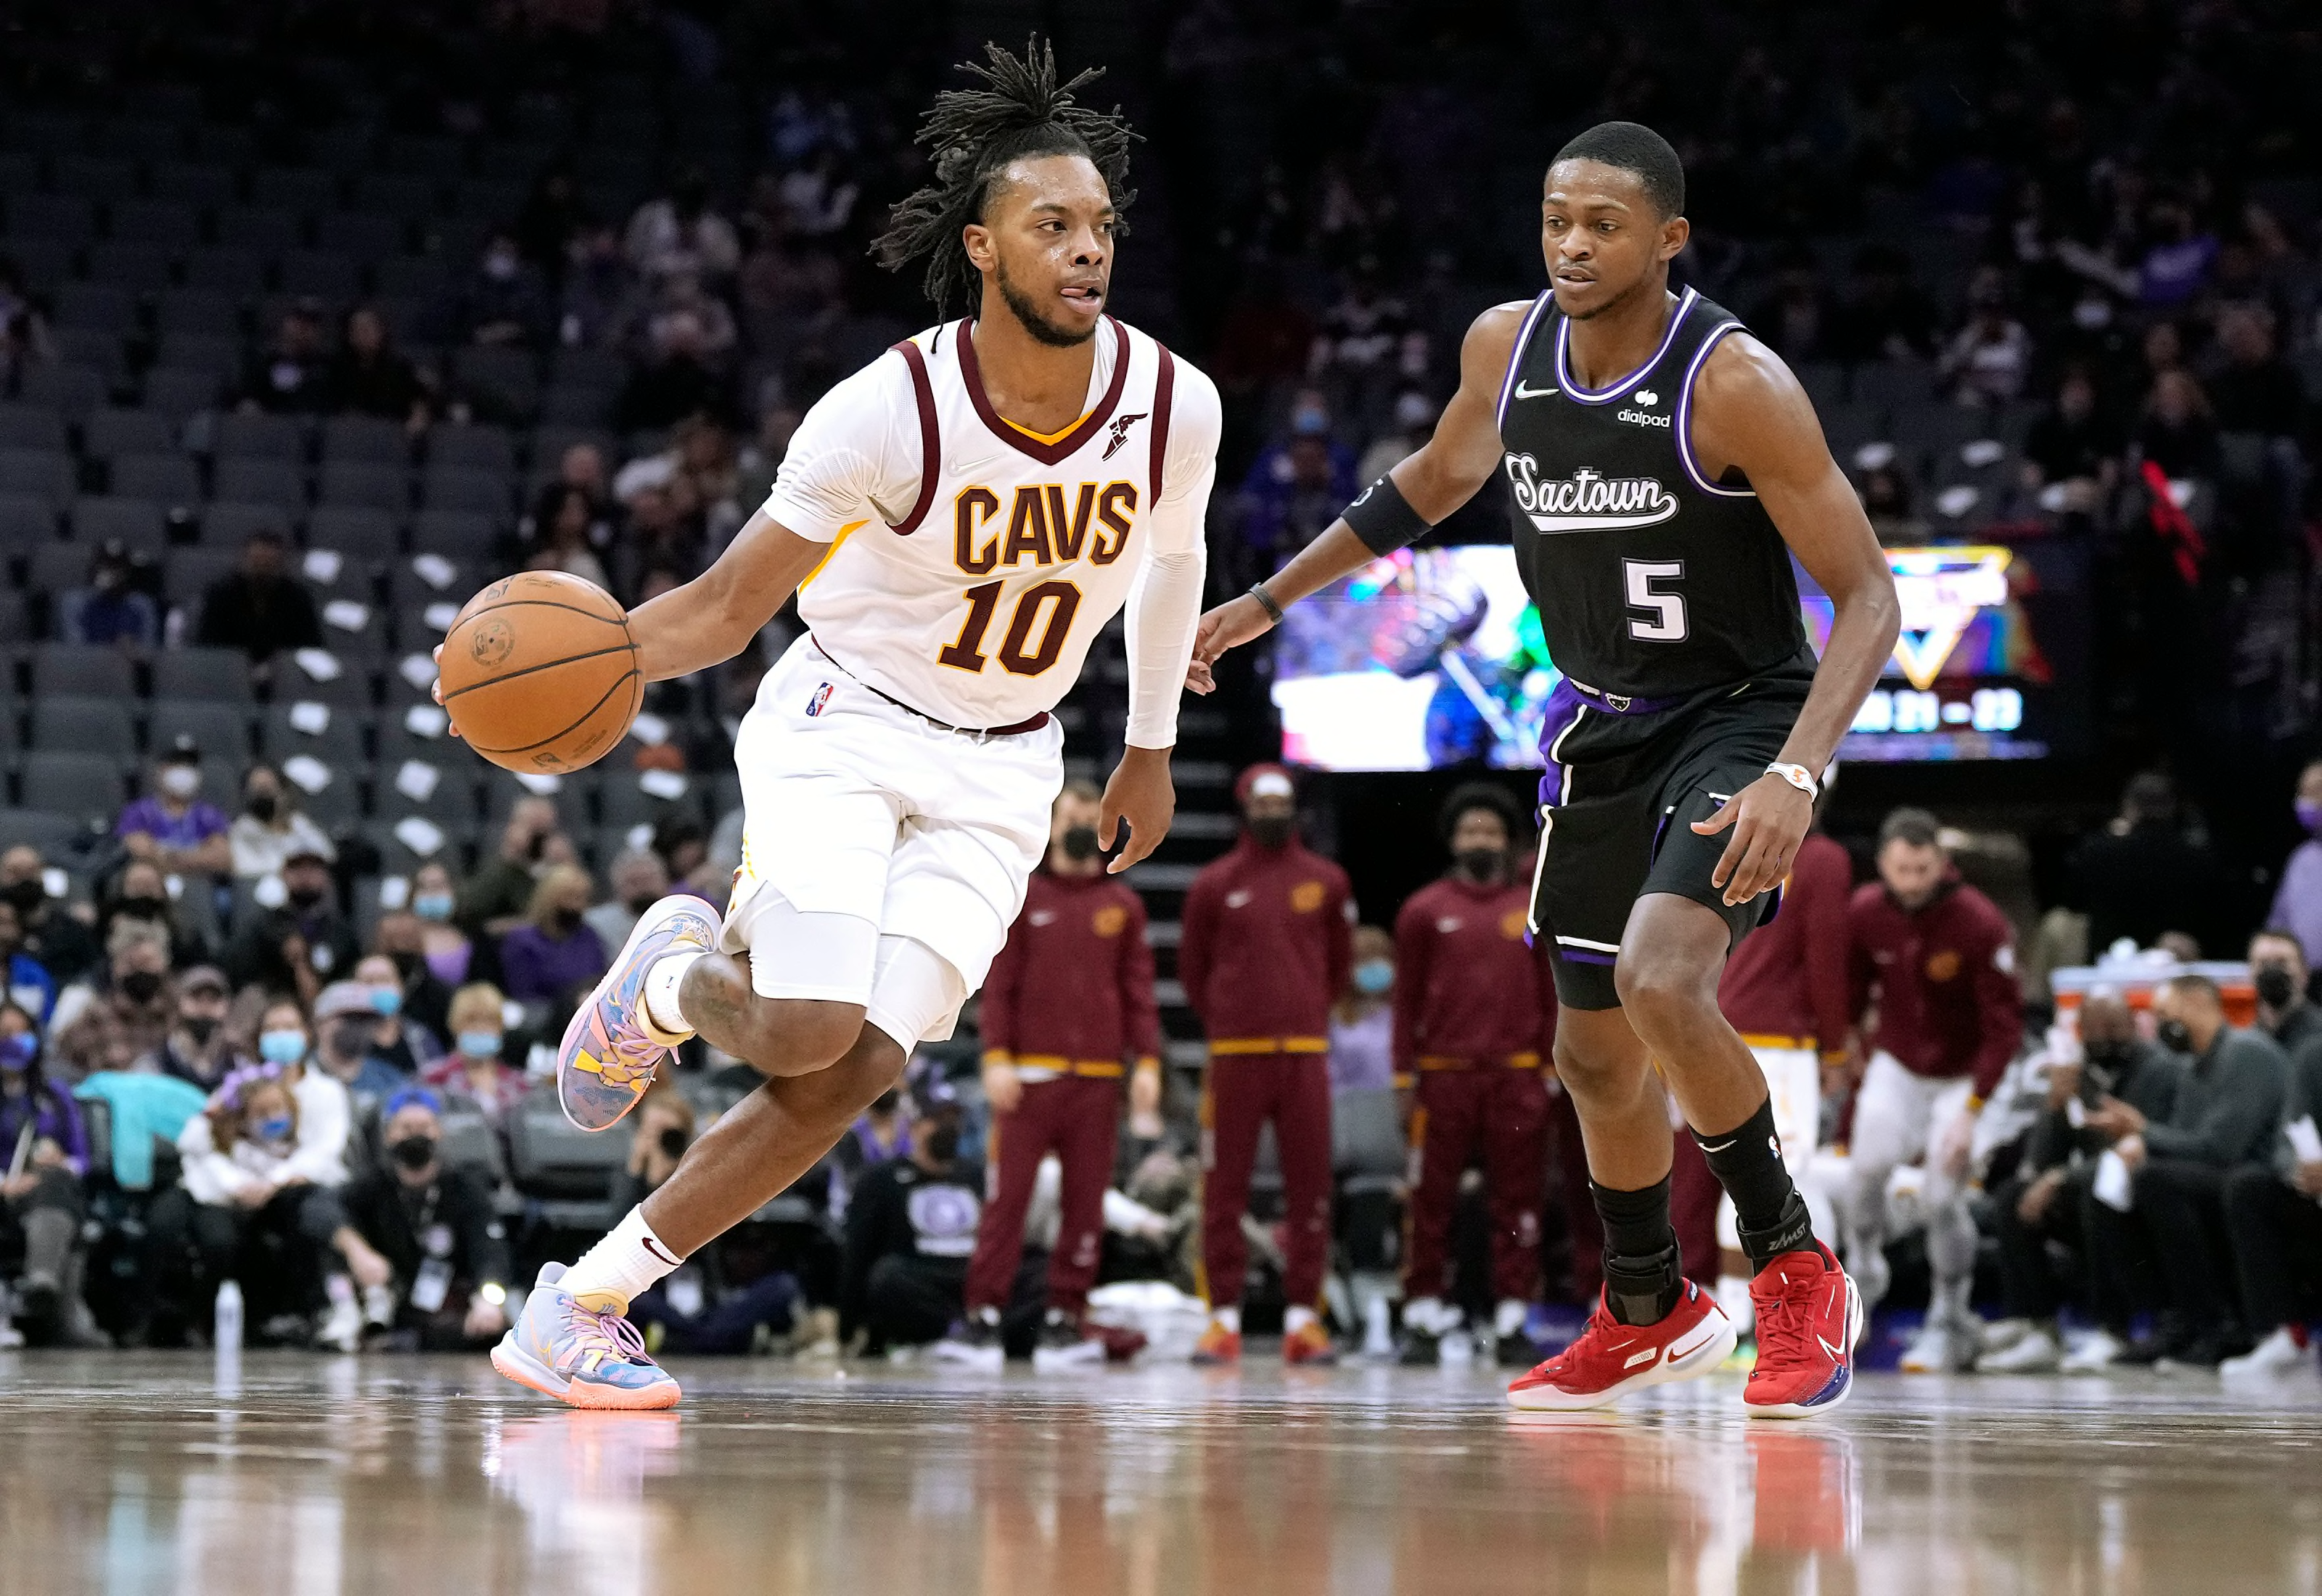 Cavs guard Darius Garland has earned the league's attention